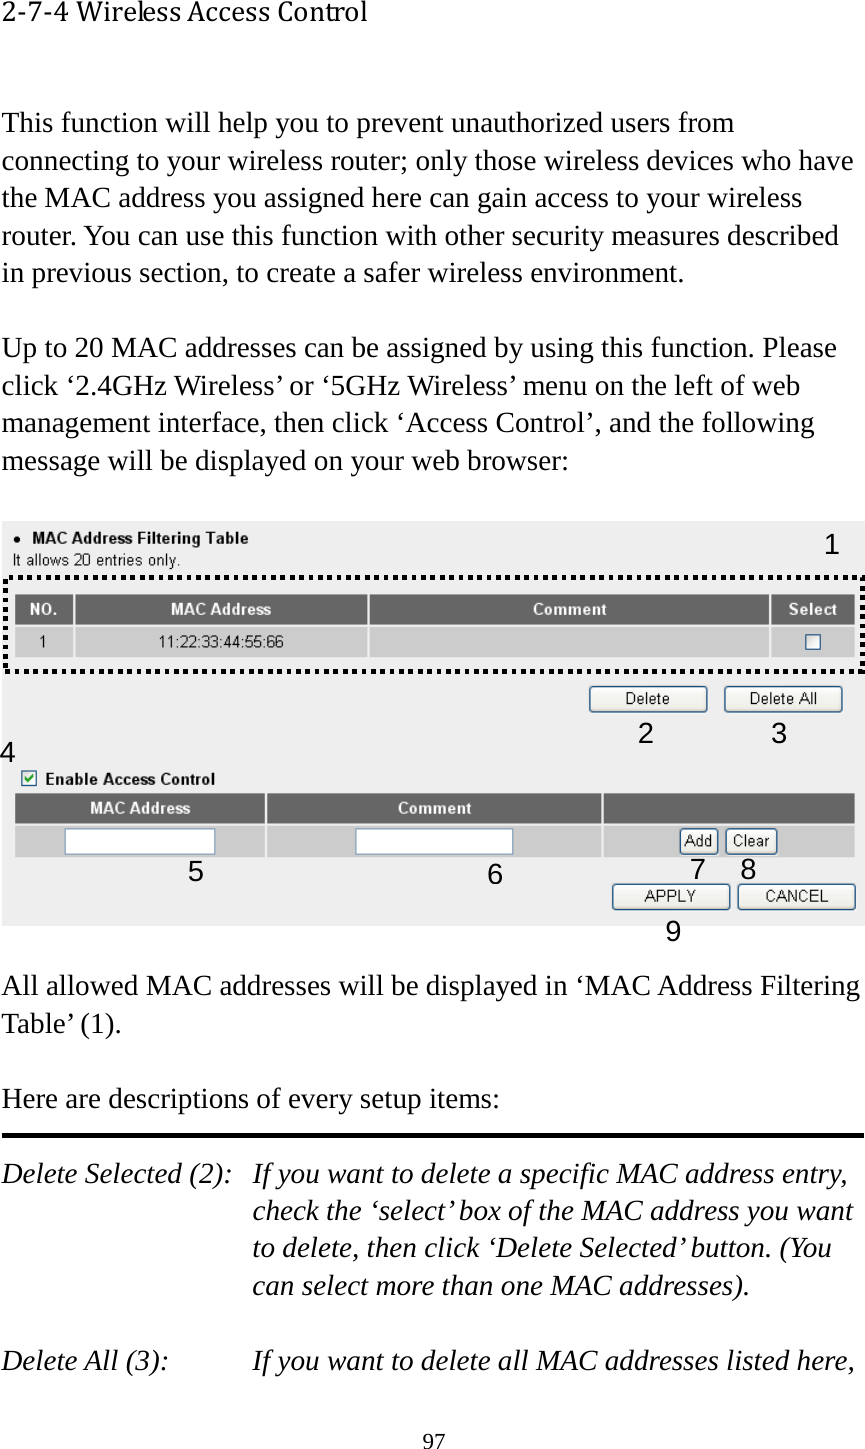 97 2-7-4 Wireless Access Control  This function will help you to prevent unauthorized users from connecting to your wireless router; only those wireless devices who have the MAC address you assigned here can gain access to your wireless router. You can use this function with other security measures described in previous section, to create a safer wireless environment.  Up to 20 MAC addresses can be assigned by using this function. Please click ‘2.4GHz Wireless’ or ‘5GHz Wireless’ menu on the left of web management interface, then click ‘Access Control’, and the following message will be displayed on your web browser:    All allowed MAC addresses will be displayed in ‘MAC Address Filtering Table’ (1).    Here are descriptions of every setup items:  Delete Selected (2):   If you want to delete a specific MAC address entry, check the ‘select’ box of the MAC address you want to delete, then click ‘Delete Selected’ button. (You can select more than one MAC addresses).  Delete All (3):   If you want to delete all MAC addresses listed here, 1 2 3 4 6 7 8 9 5 